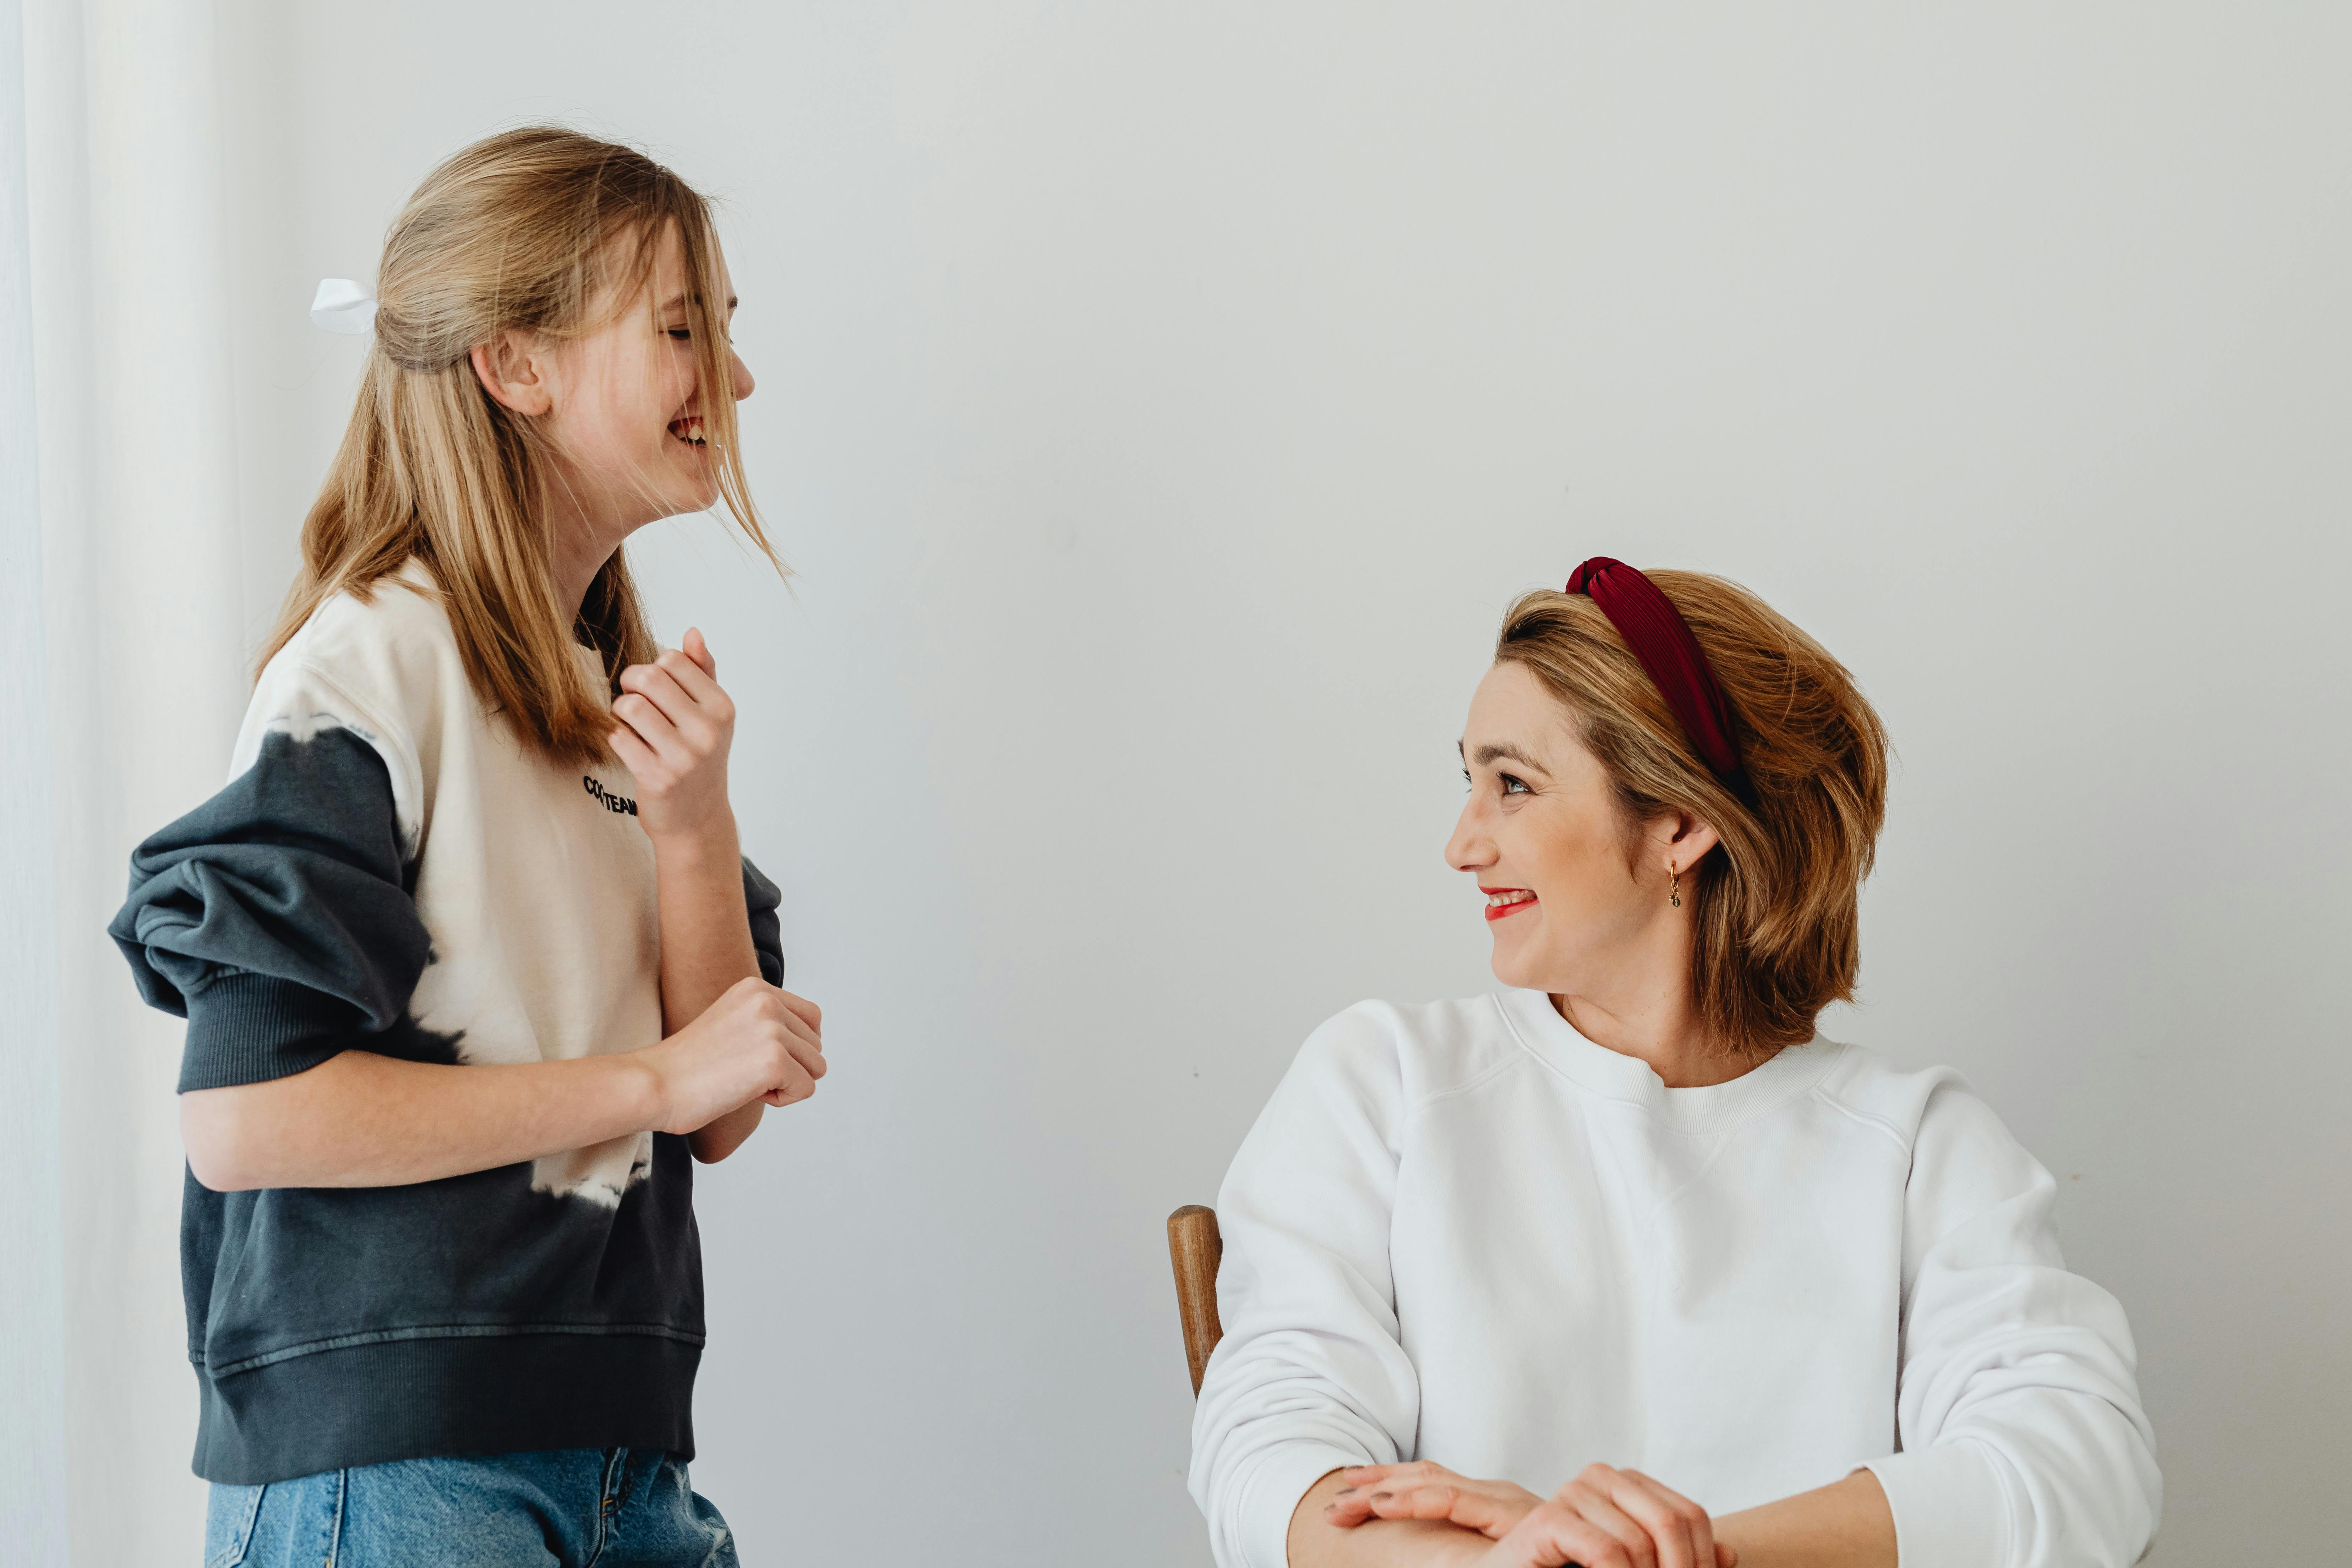 A mom and daughter smiling at each other | Source: Pexels